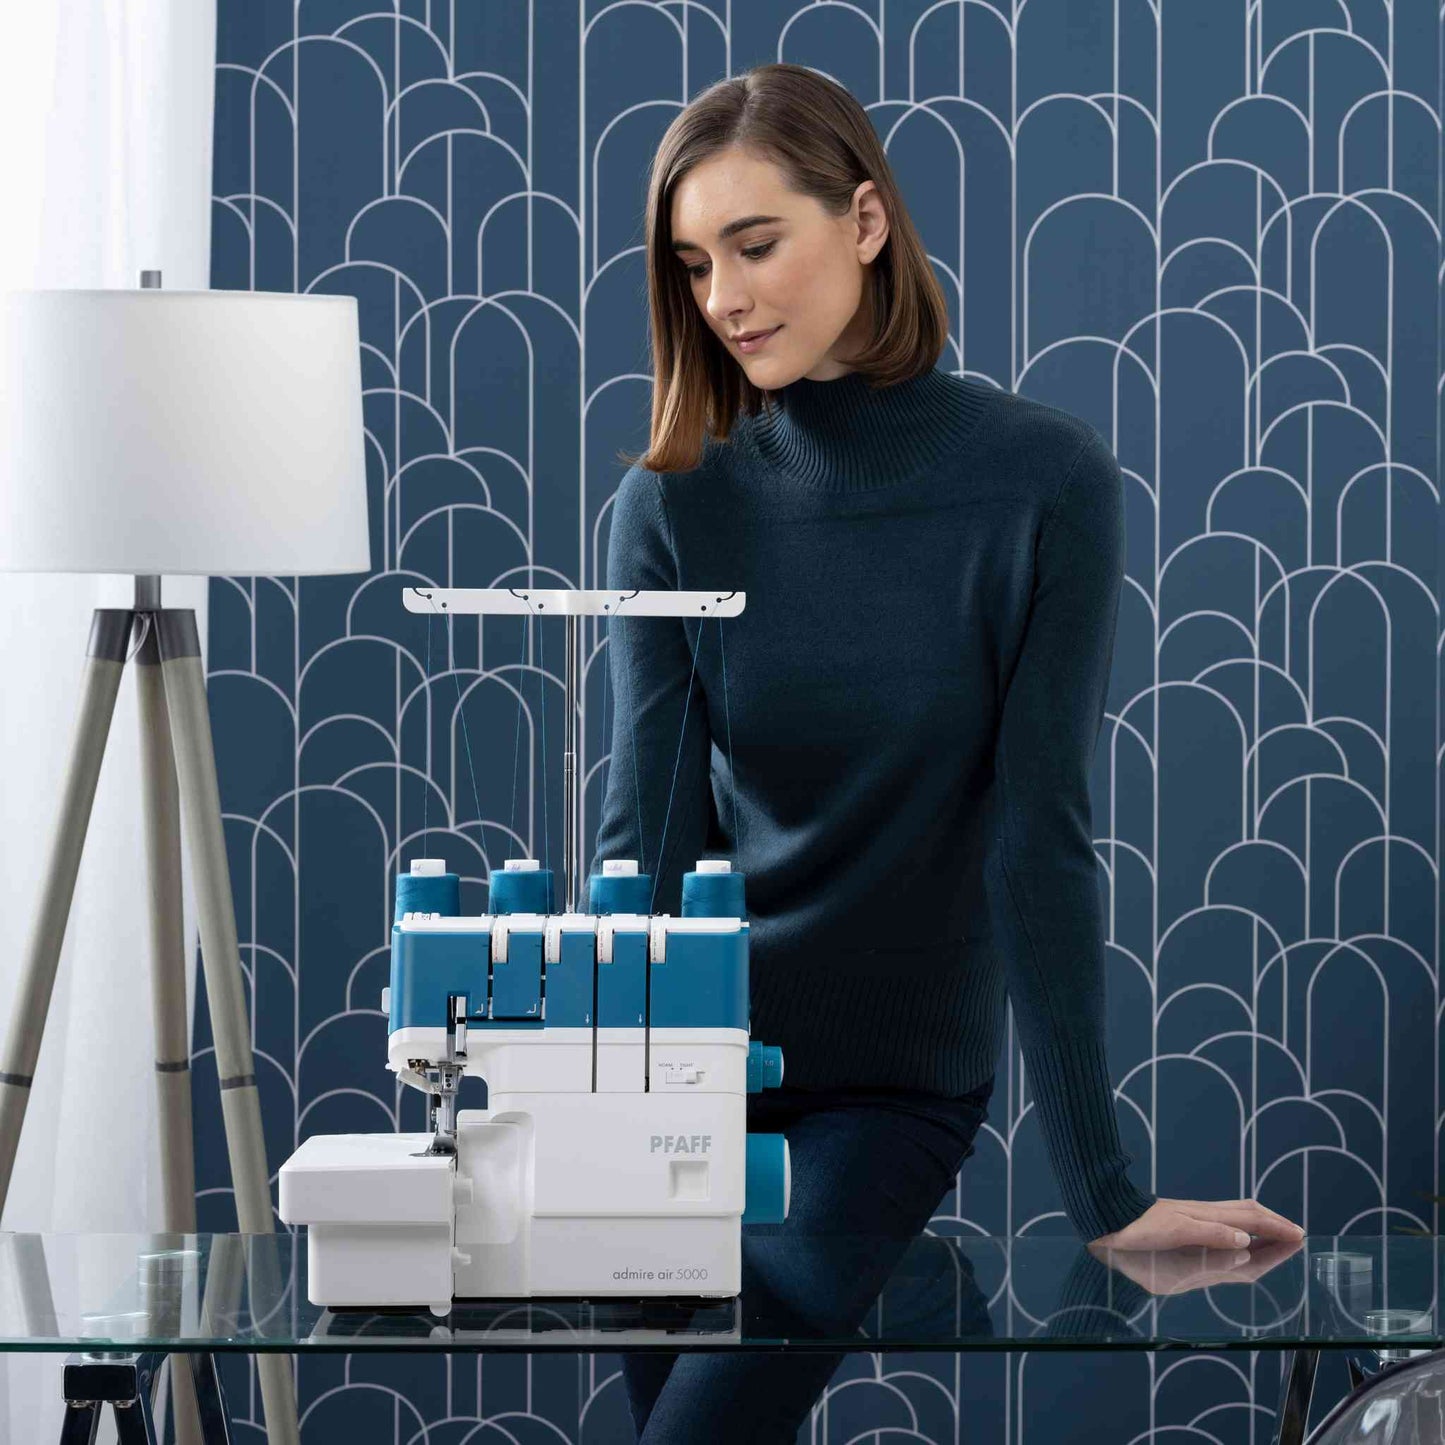 Pfaff Admire Air 5000 overlocker / serger air threading machine shown with a model in front of blue and grey geometric wallpaper.